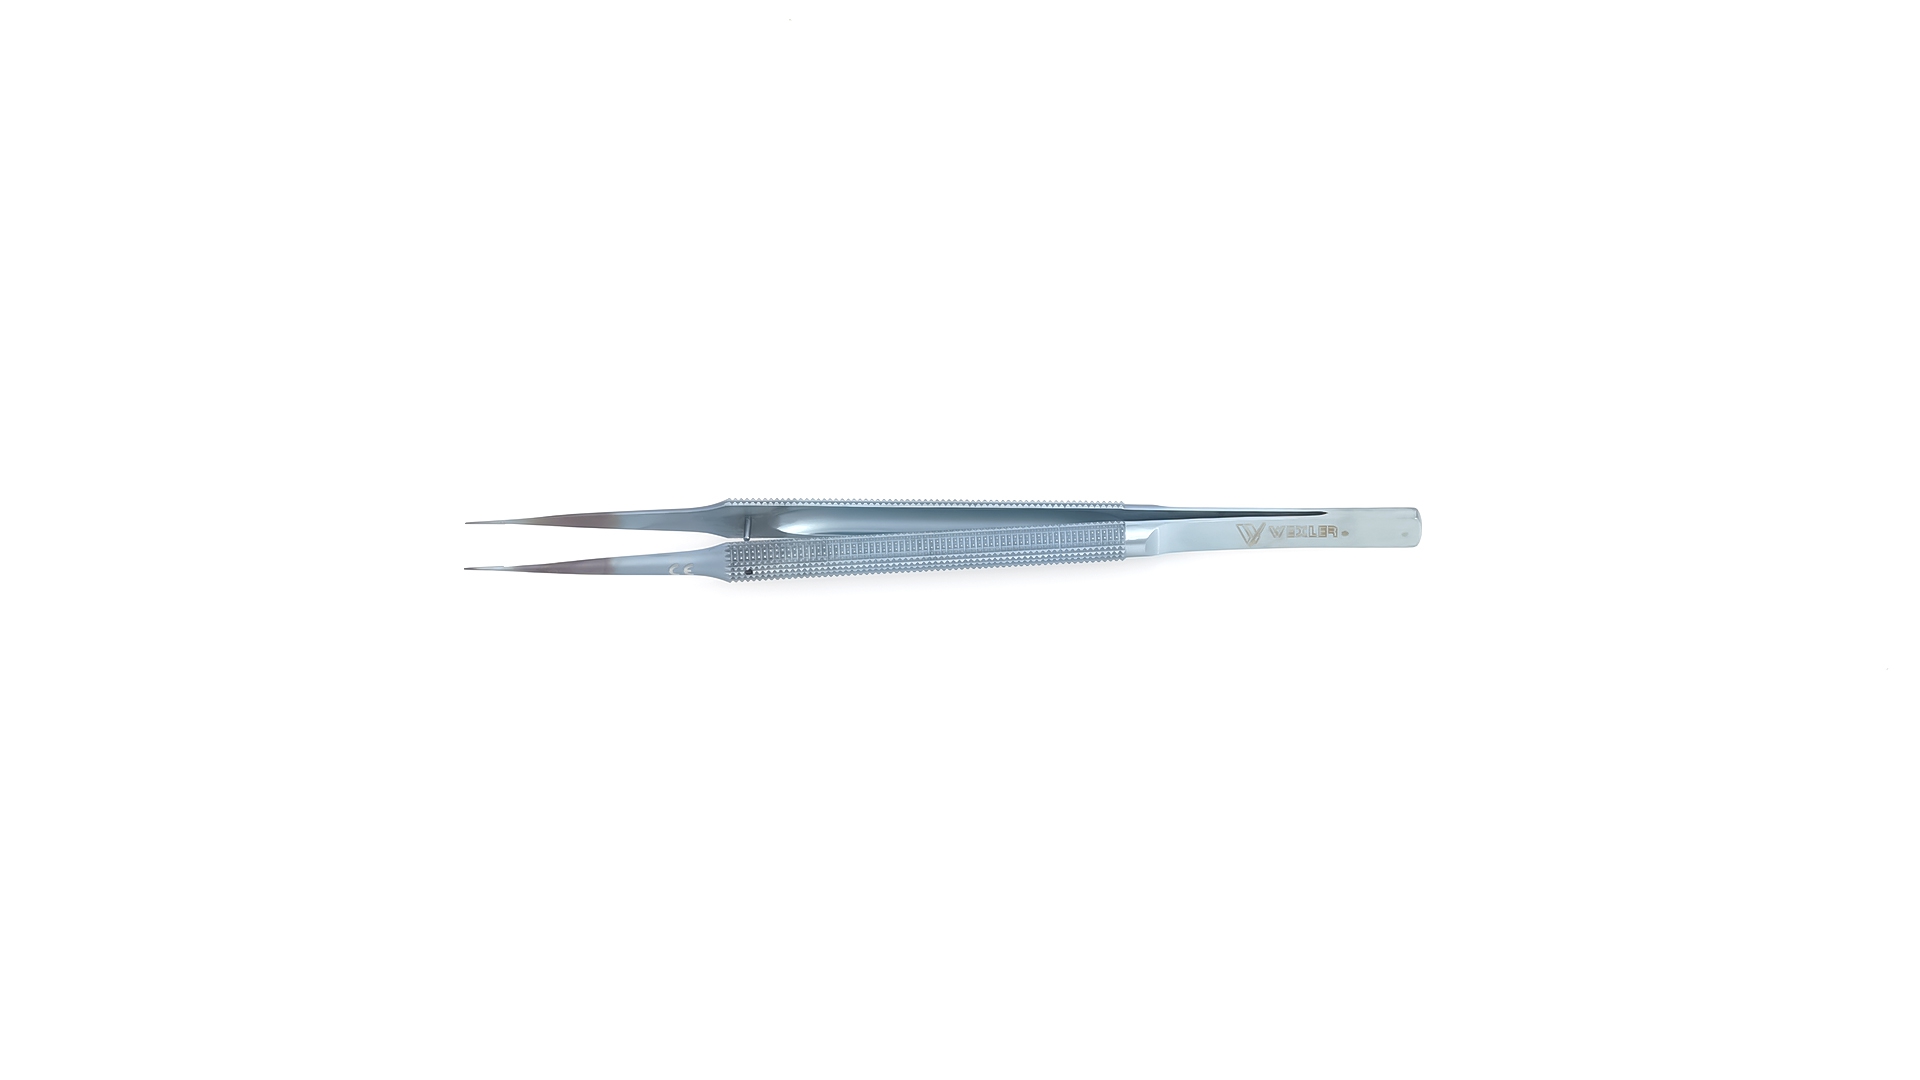 Micro Forceps - Straight 0.4mm concave/convex tips